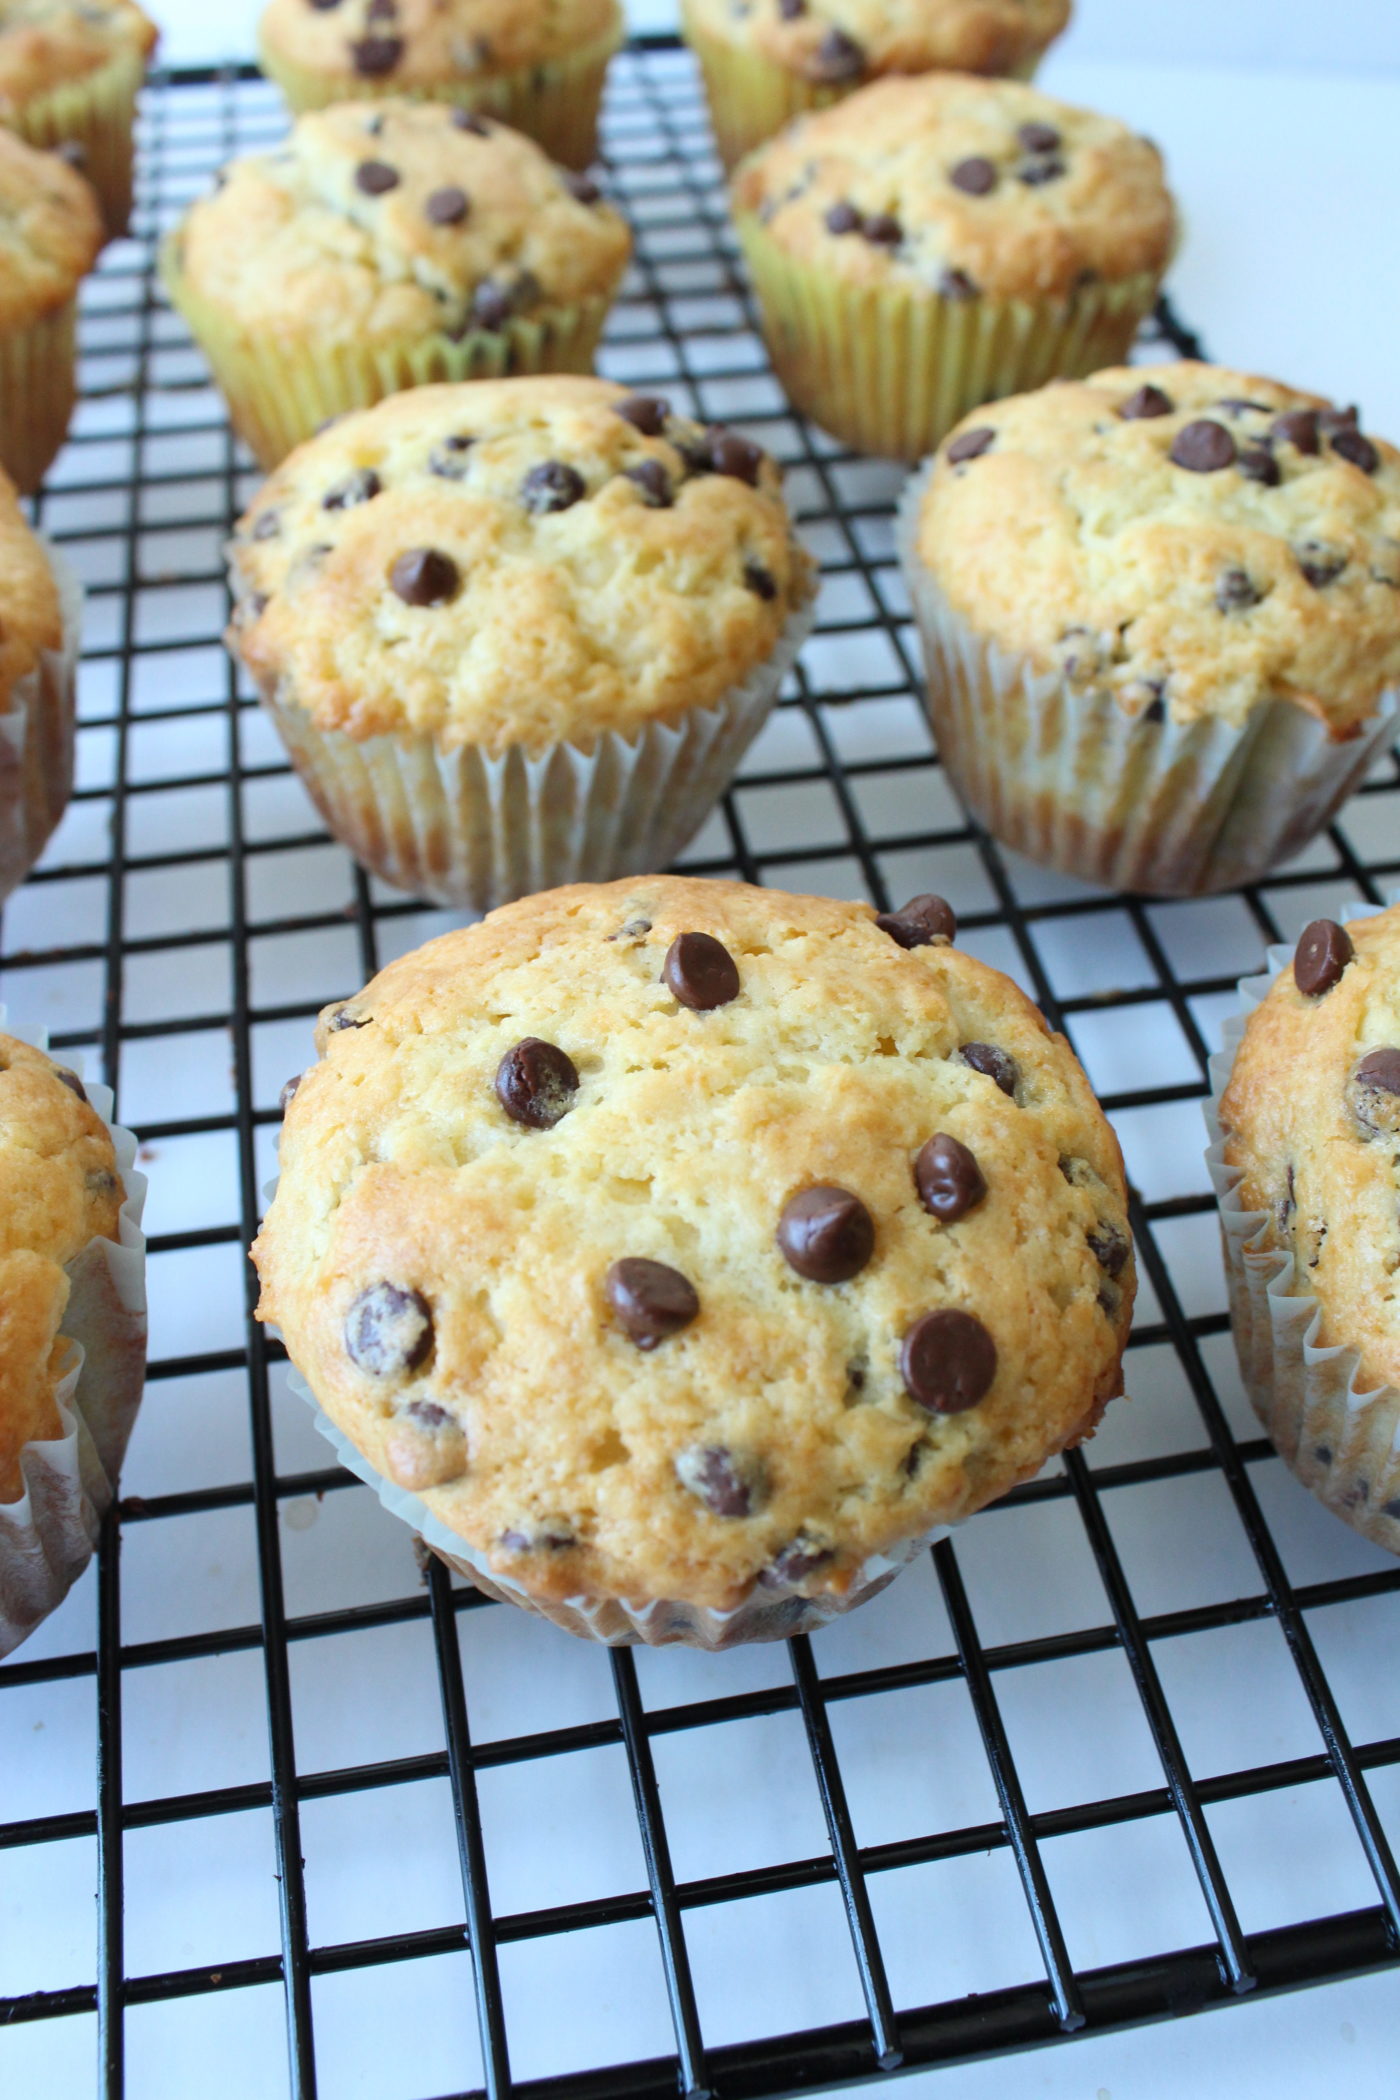 Chocolate chip muffins | Eat.Drink.Frolic.